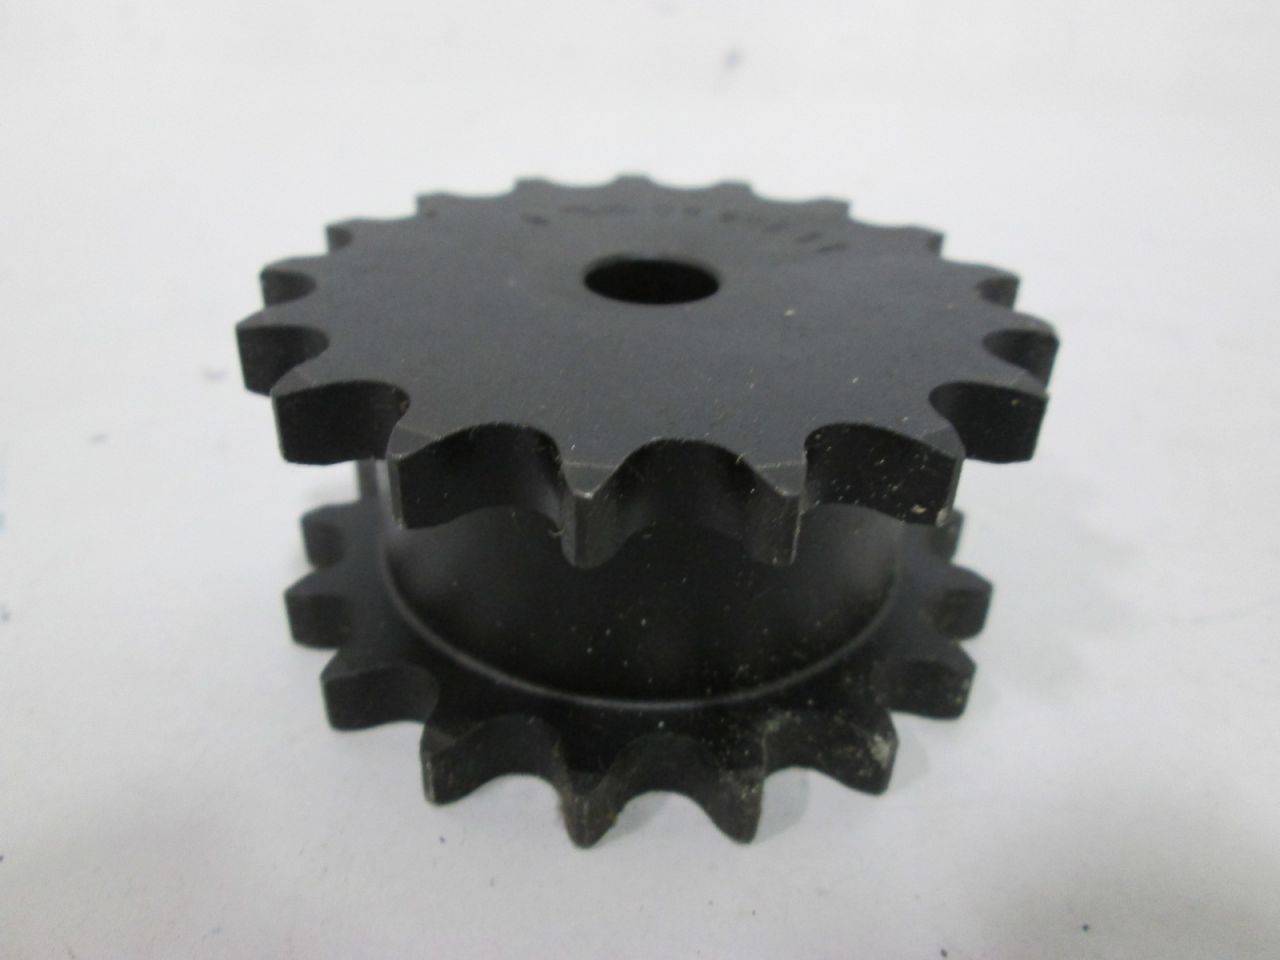 1/2 in Stock Bore Sprocket Steel Martin Sprocket & Gear DS40A17 17 Teeth 40/1/2 in Rough Stock Bore 